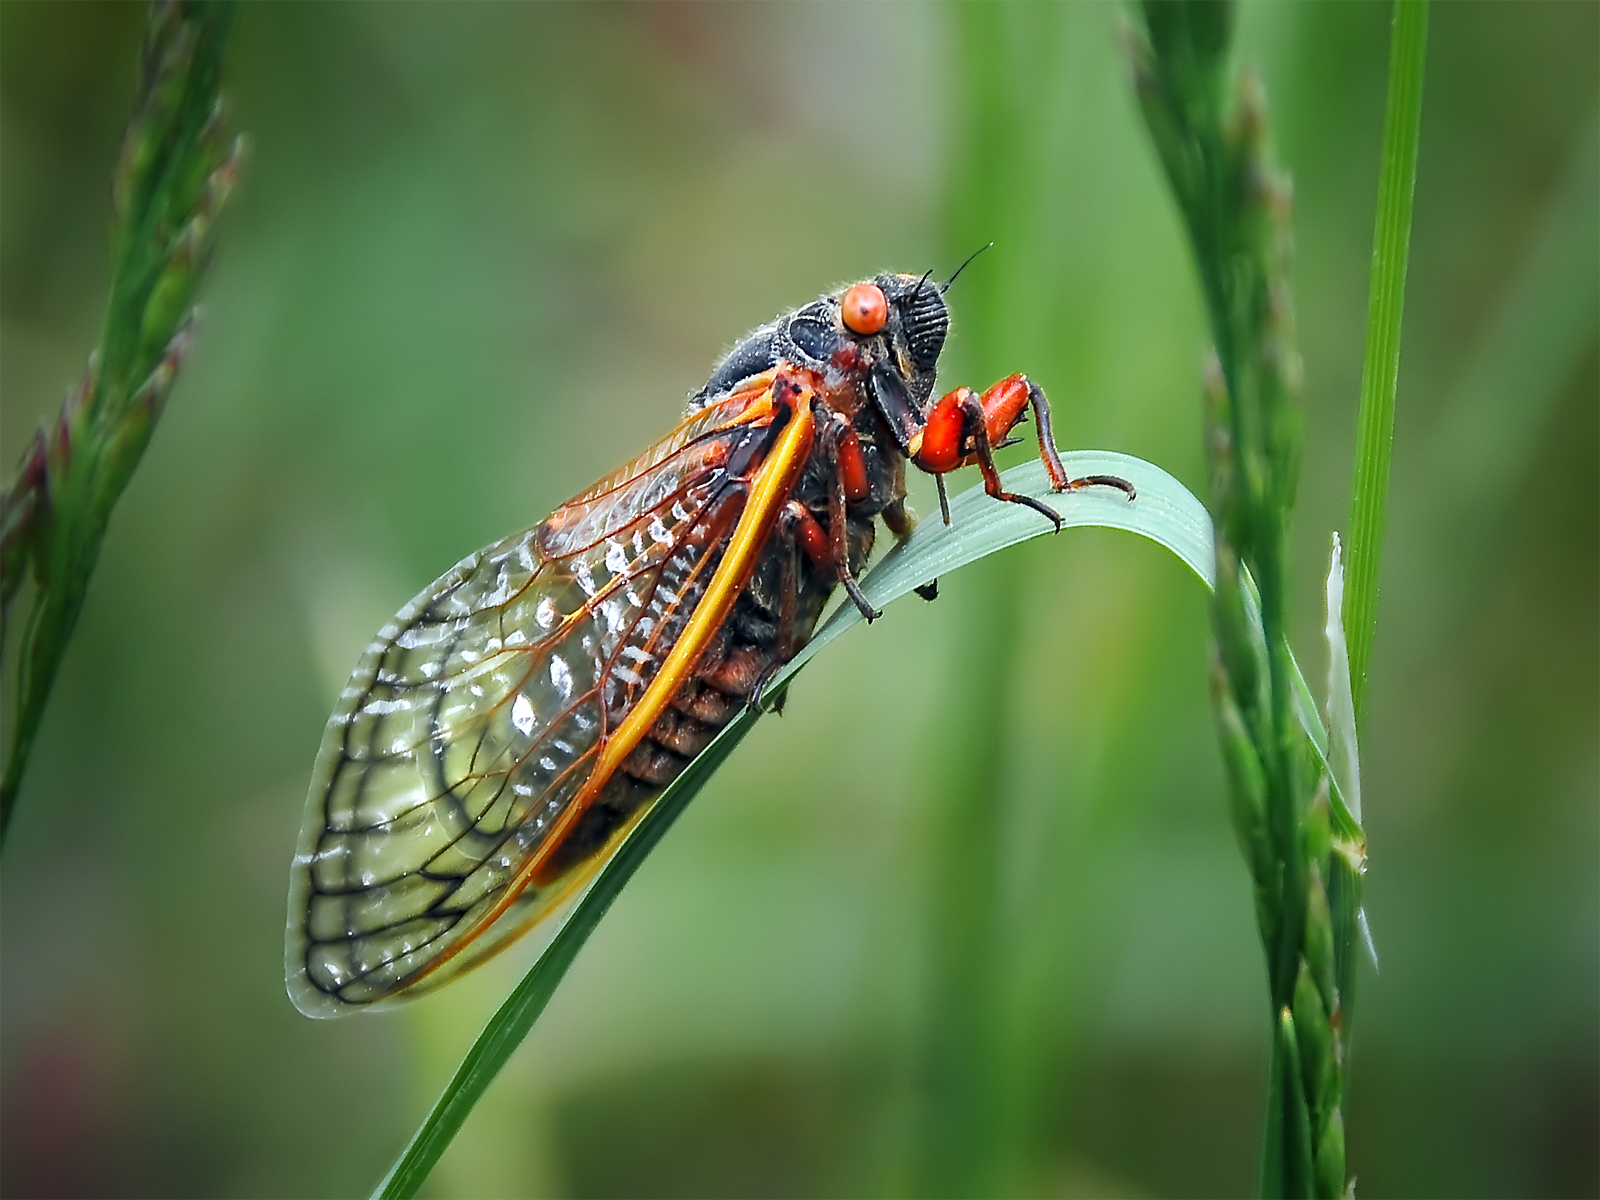 Trillions of Brood 10 Cicadas to Emerge in U.S. After 17 Years Underground